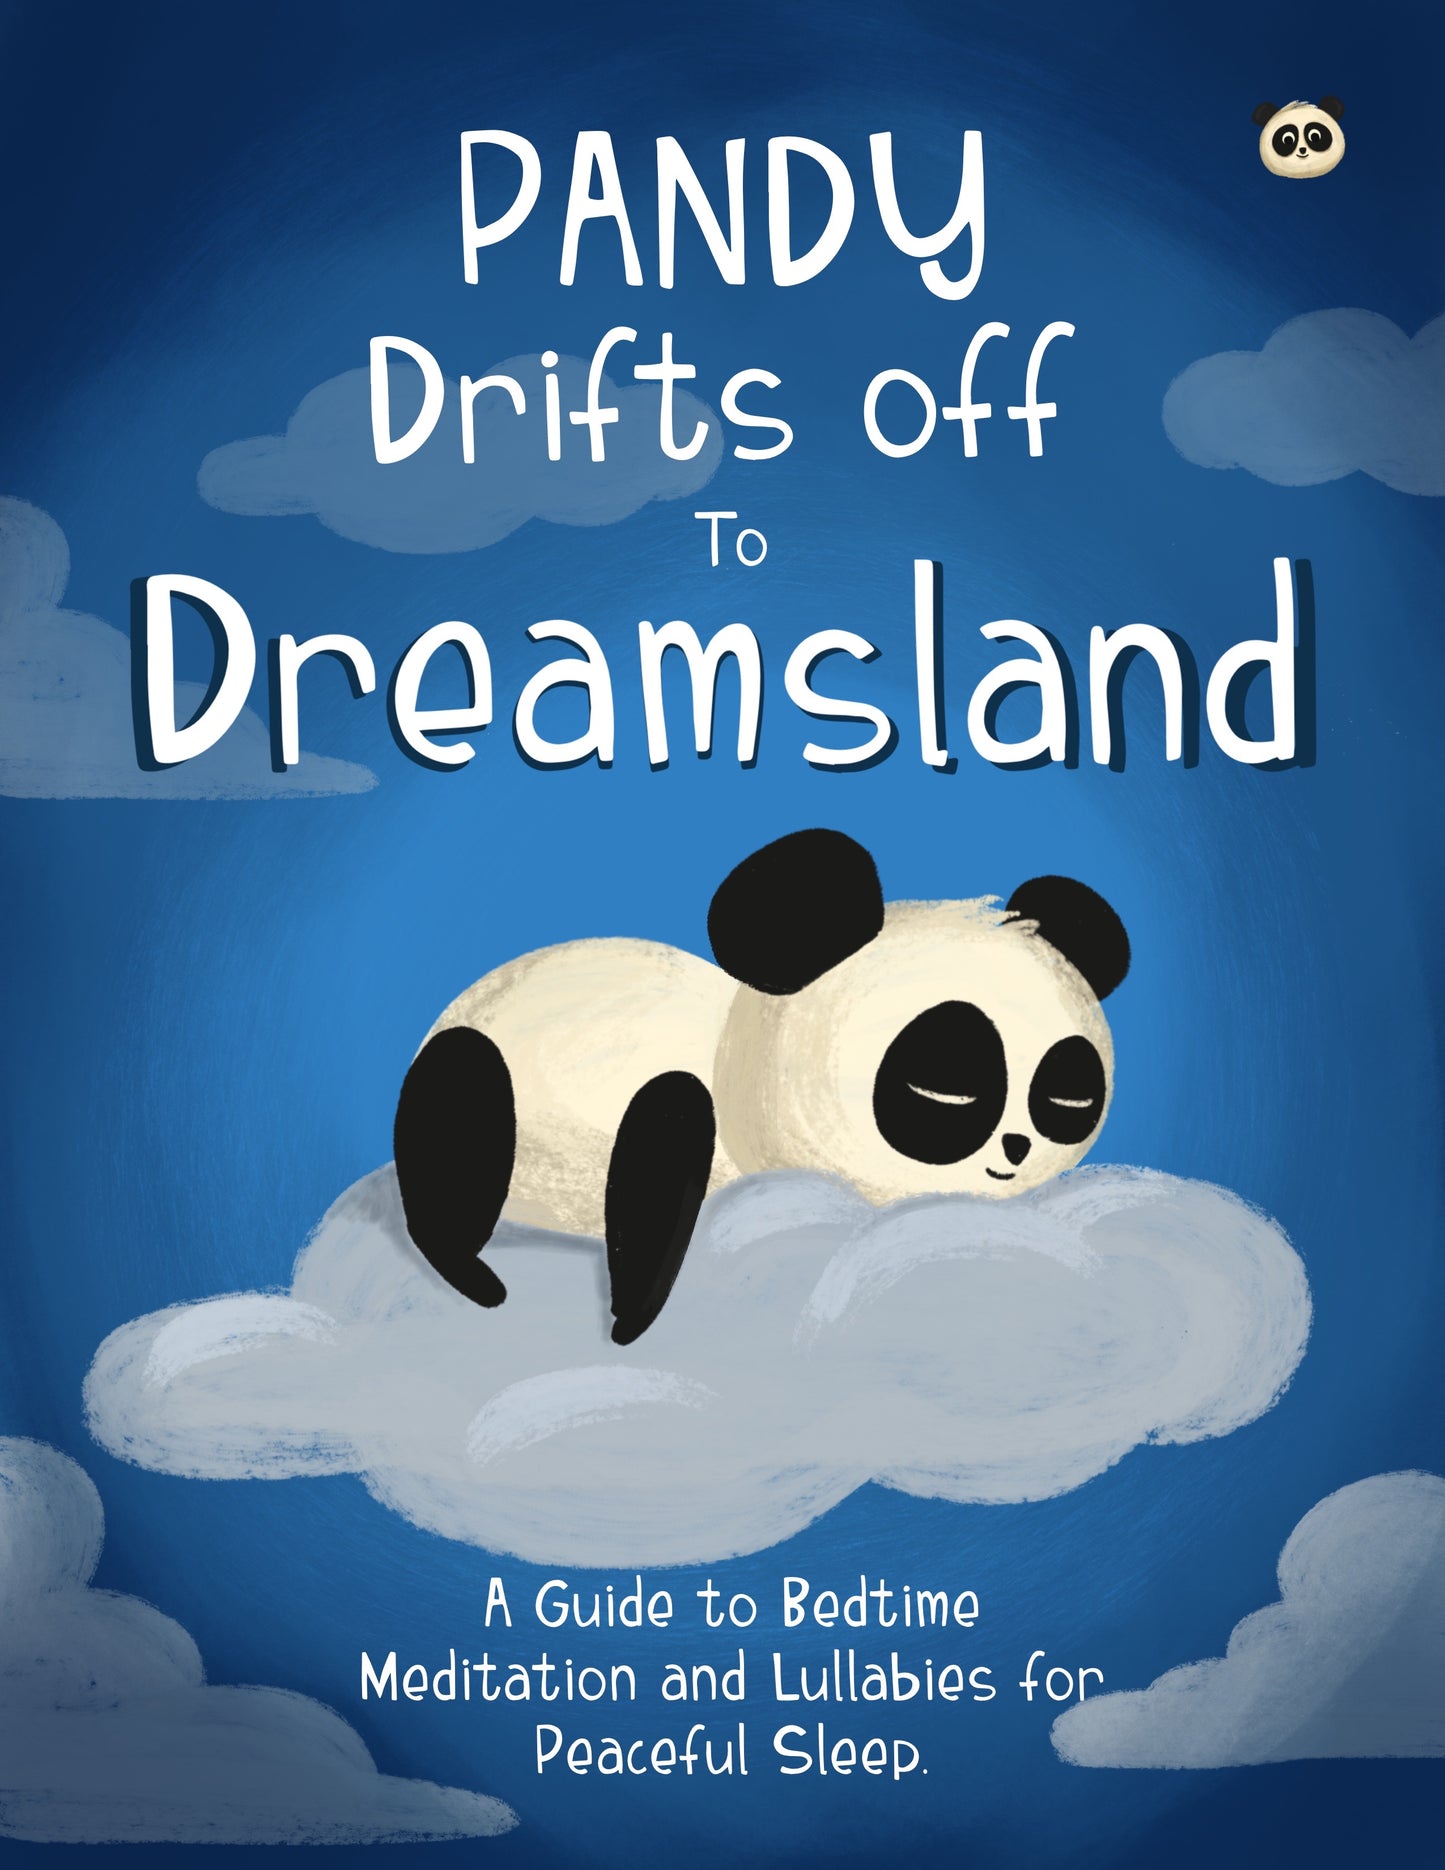 Pandy Drifts off to Dreamland: A Guide to Bedtime Meditation and Lullabies for Peaceful Sleep